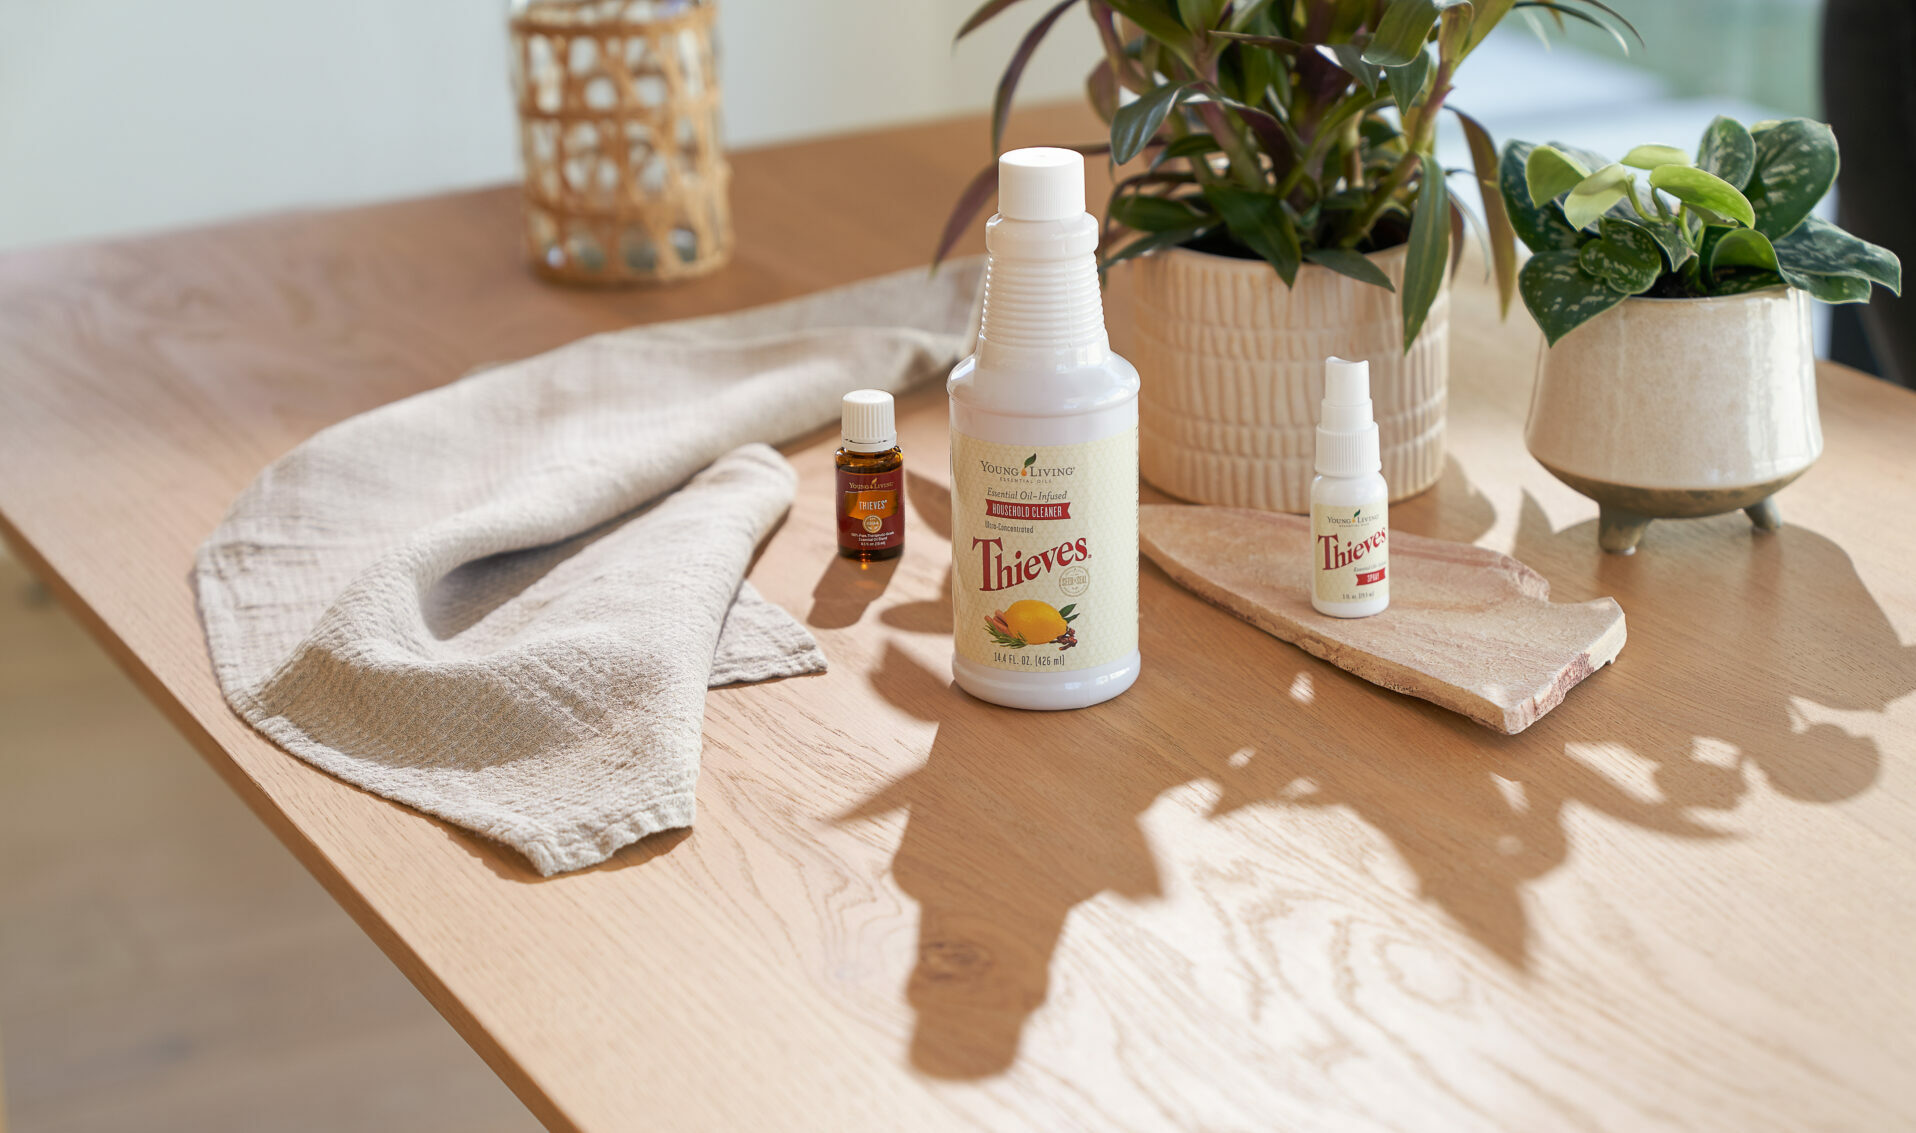 Thieves Household Cleaner, Thieves Essential Oil, and Thieves Spray sitting on countertop - Young Living Lavender Life Blog 